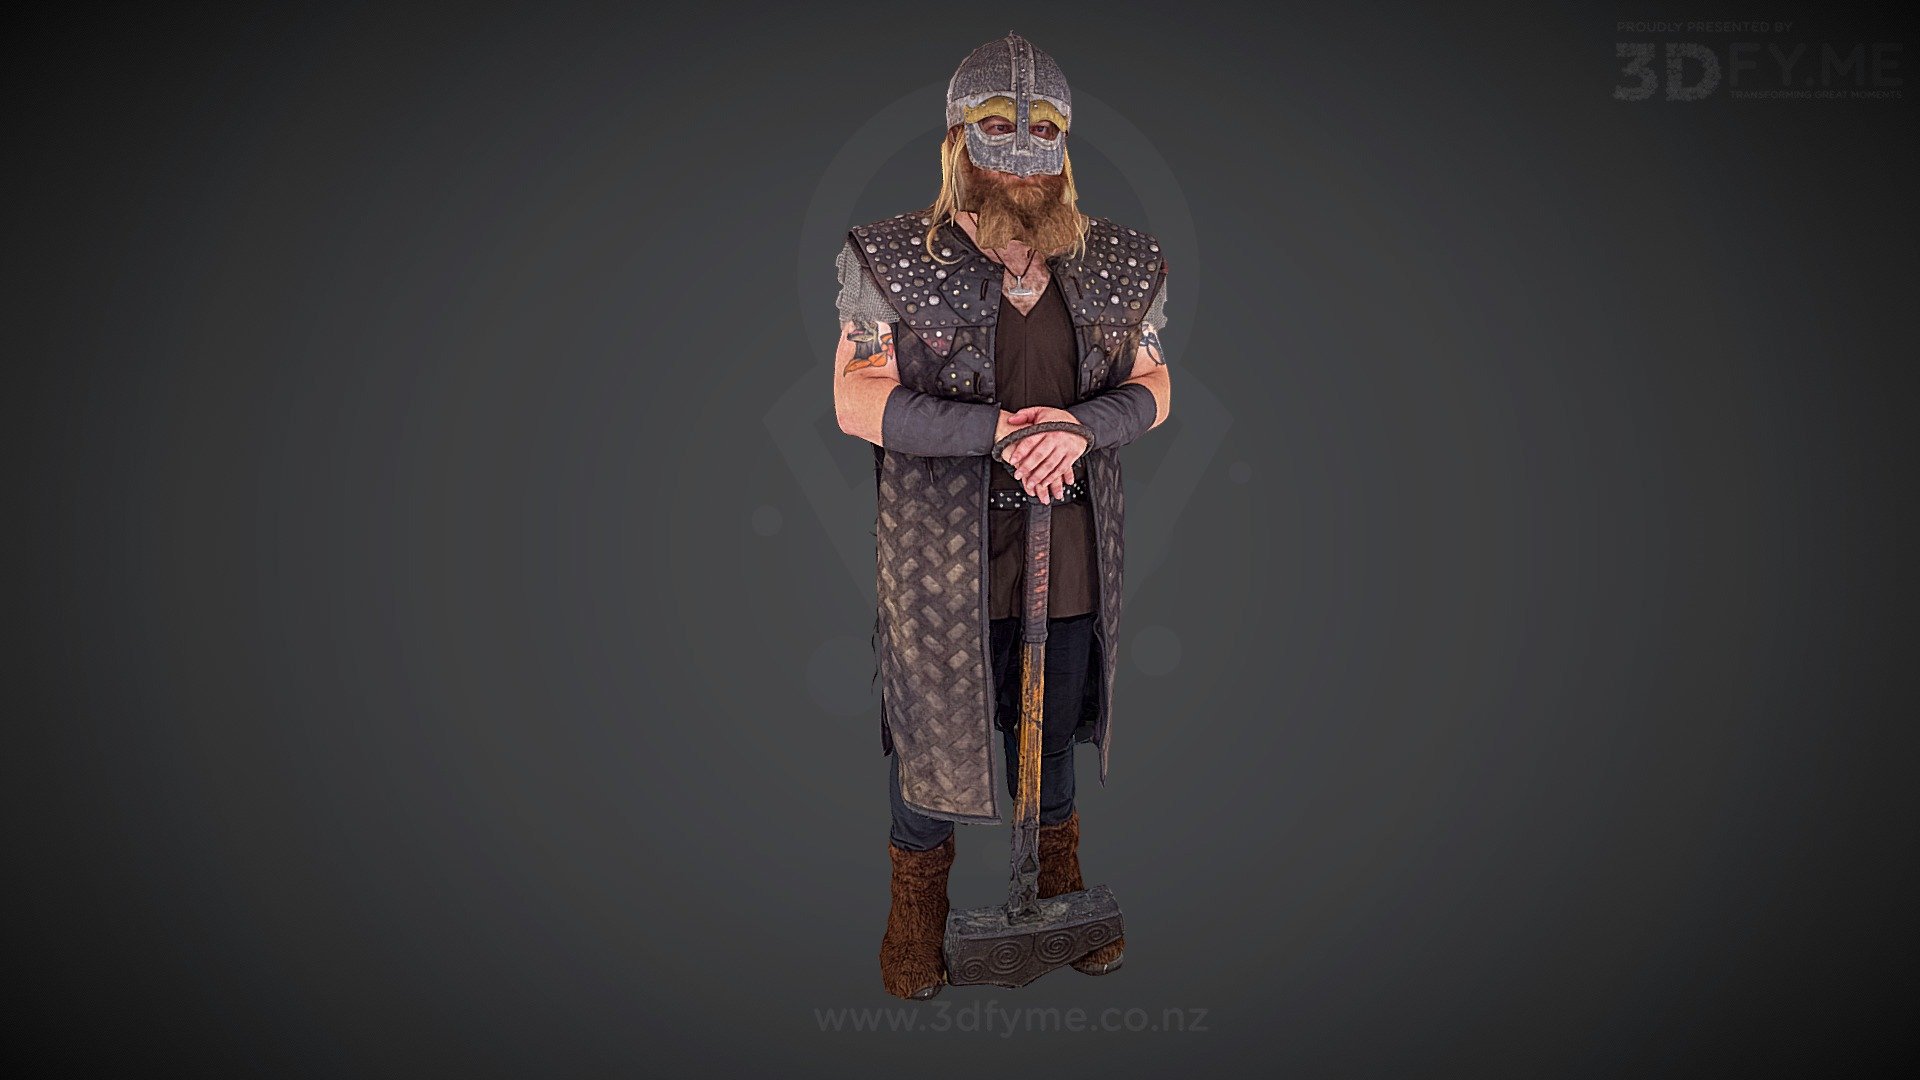 Photogrammetry scan, 140 pics (8 MP), decimated, texture re-projected (raw diffuse map, 8k) - Viking Cosplay / Underground Arts Tattoo Studio - 3D model by 3Dfy.me New Zealand (@smacher2016) 3d model